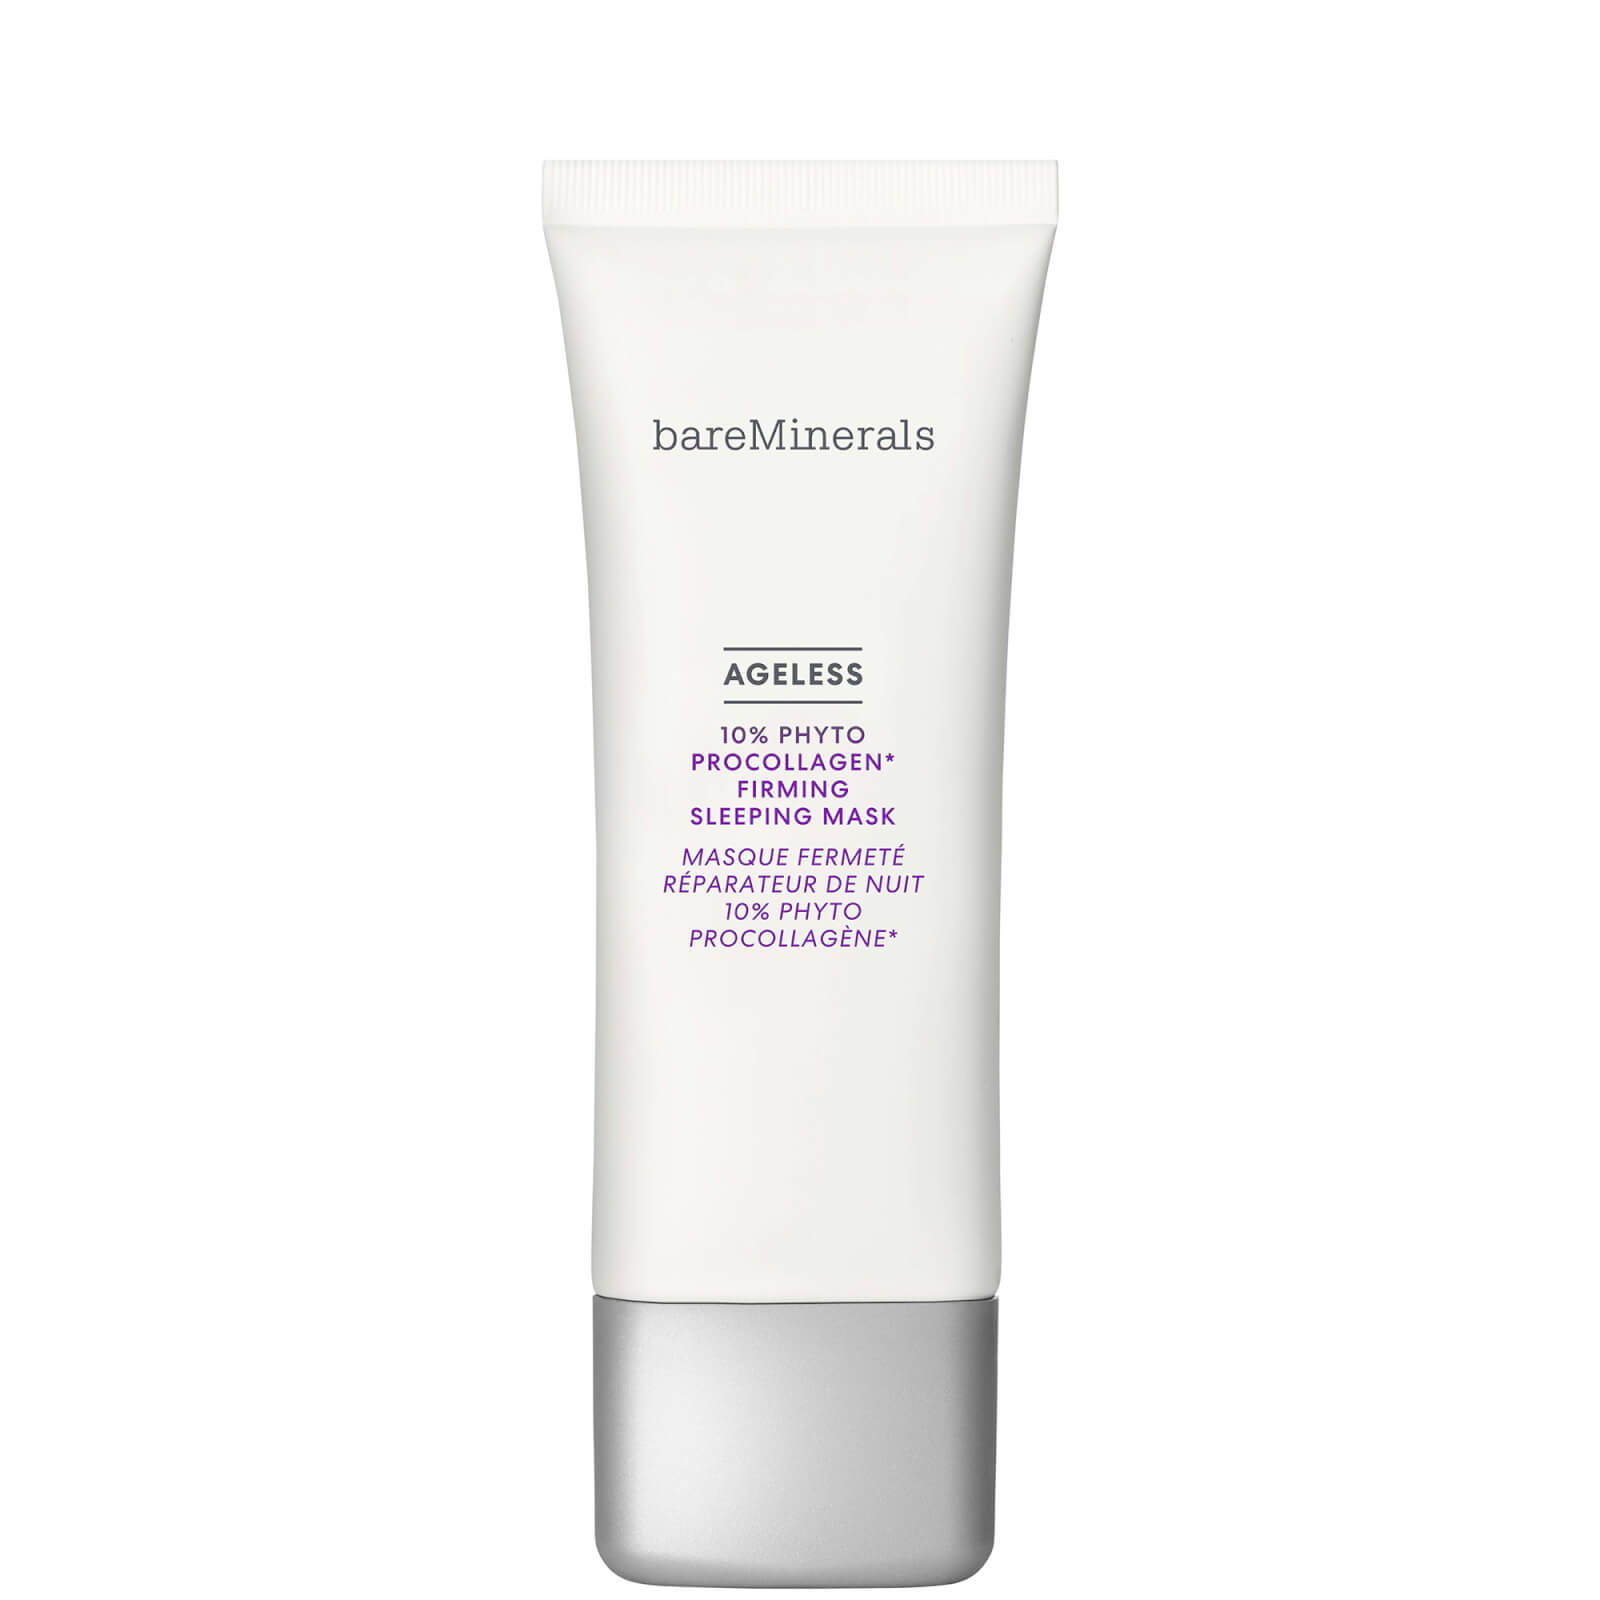 Photos - Facial Mask bareMinerals Ageless Phyto Procollagen Instant Firming Sleeping Mask 75ml 